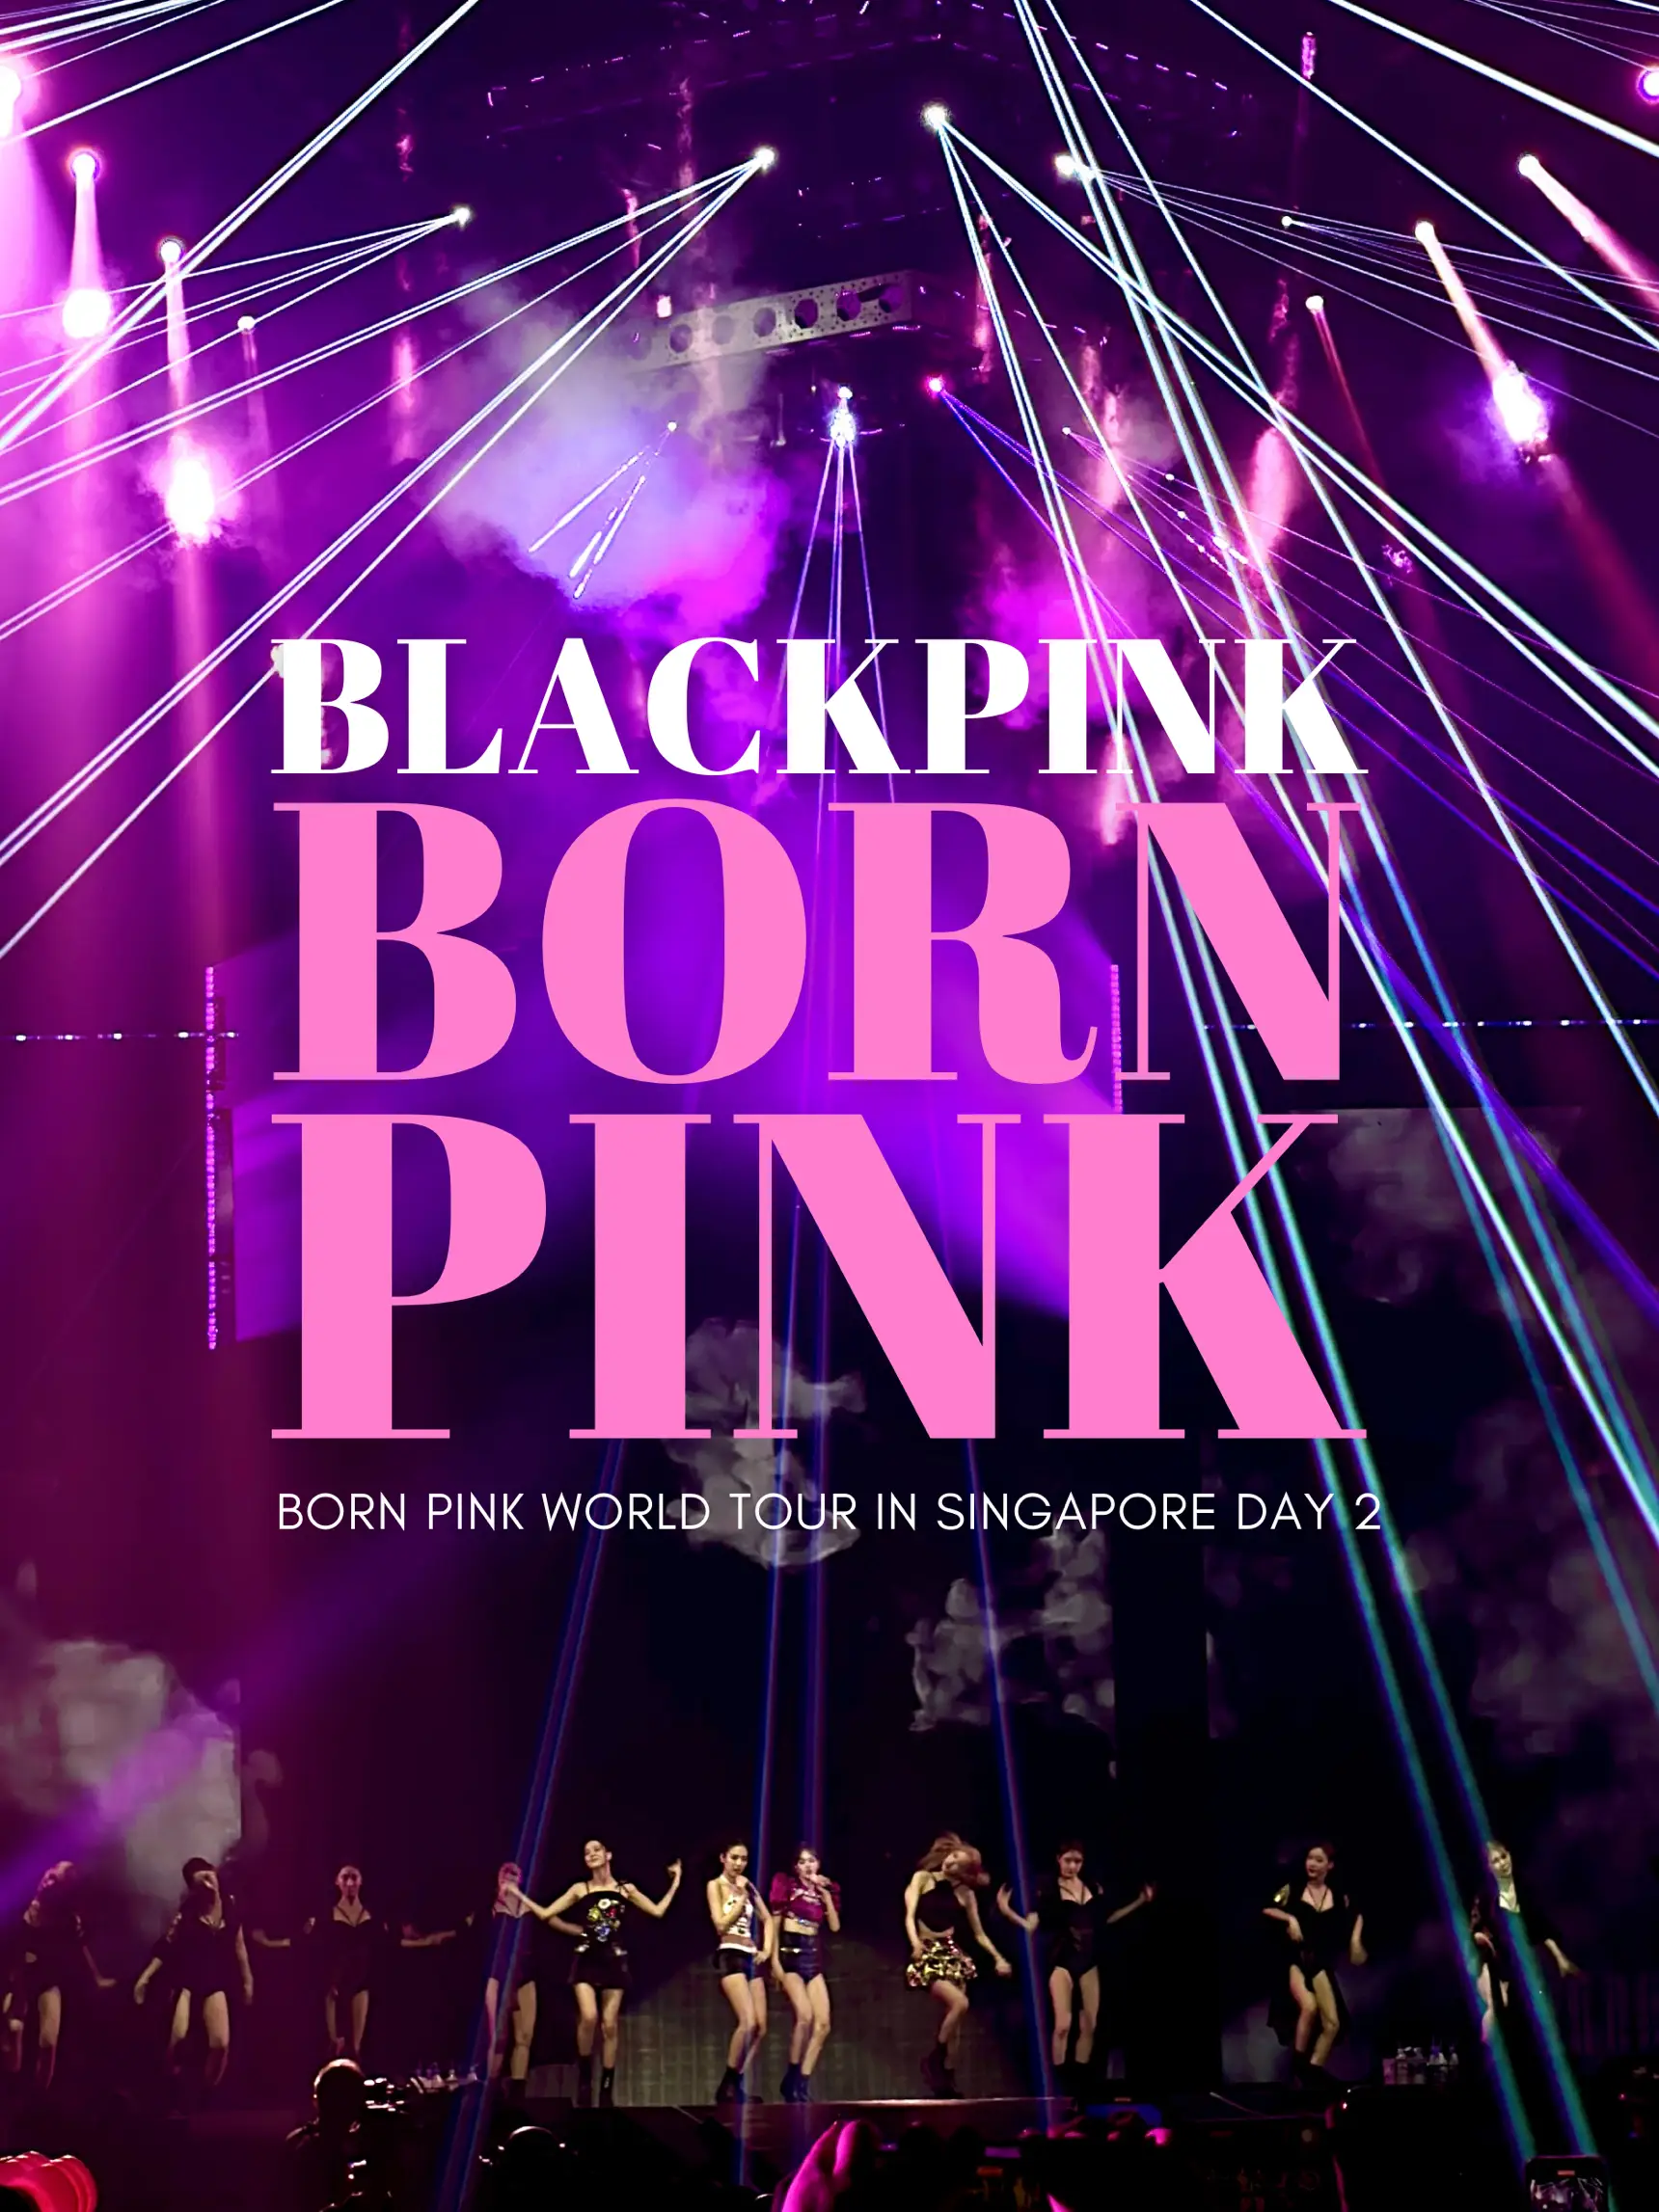 Update: BLACKPINK Excites With Mesmerizing “BORN PINK” D-Day Poster